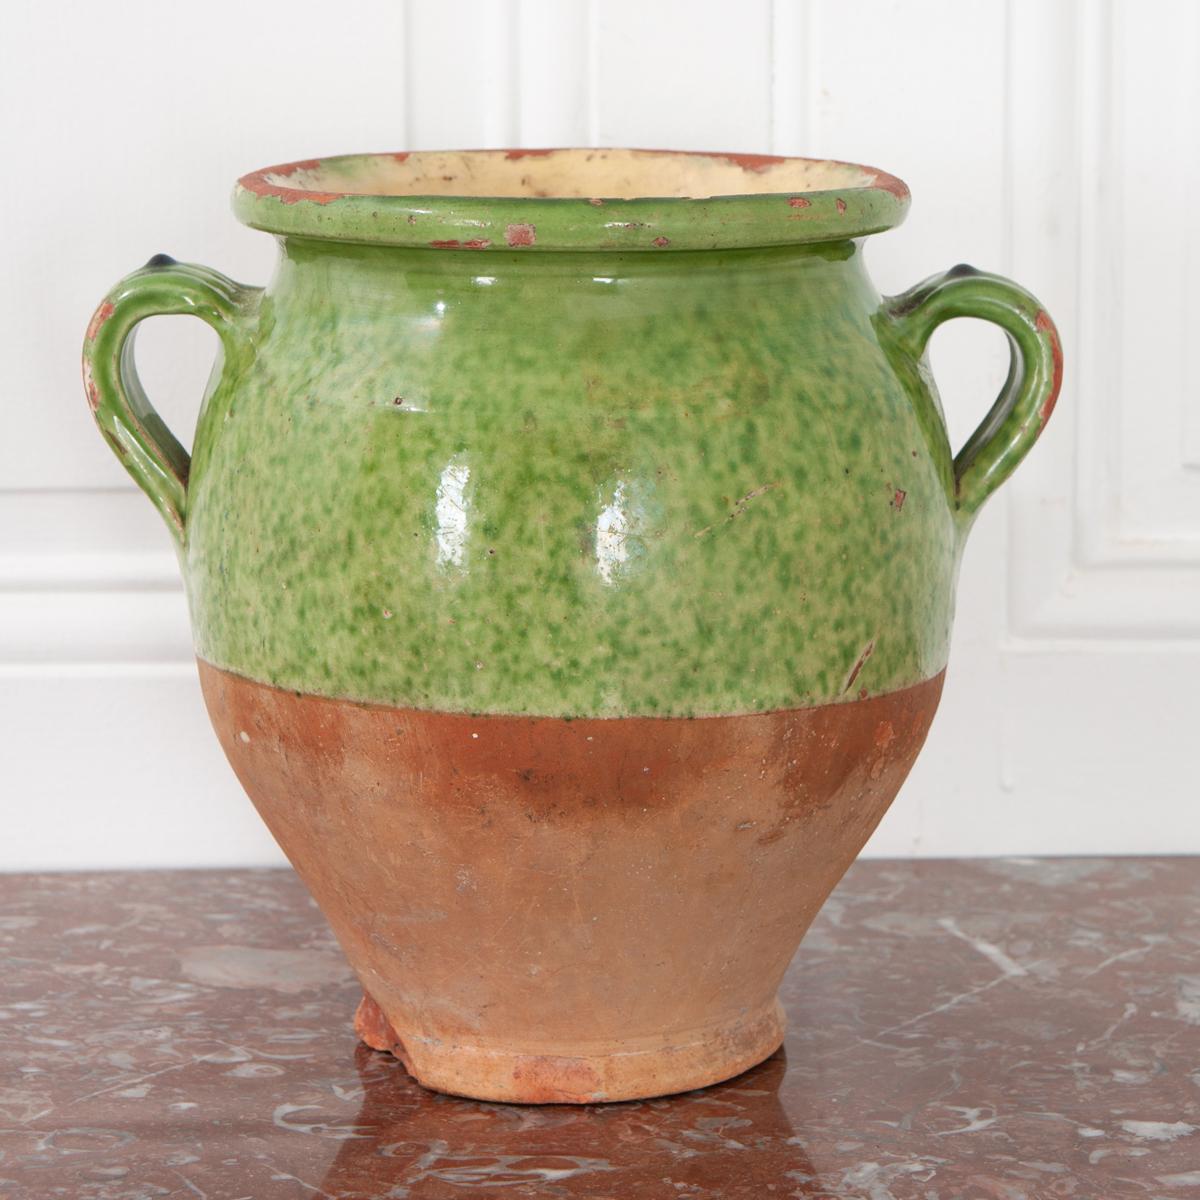 Light green glazed confit jar for storing meat and fat. Most of these jars are only glazed on the top half of the exterior and on the inside. While the exterior is green with a light, creamy undertone, the interior is glazed in yellow. The bottom